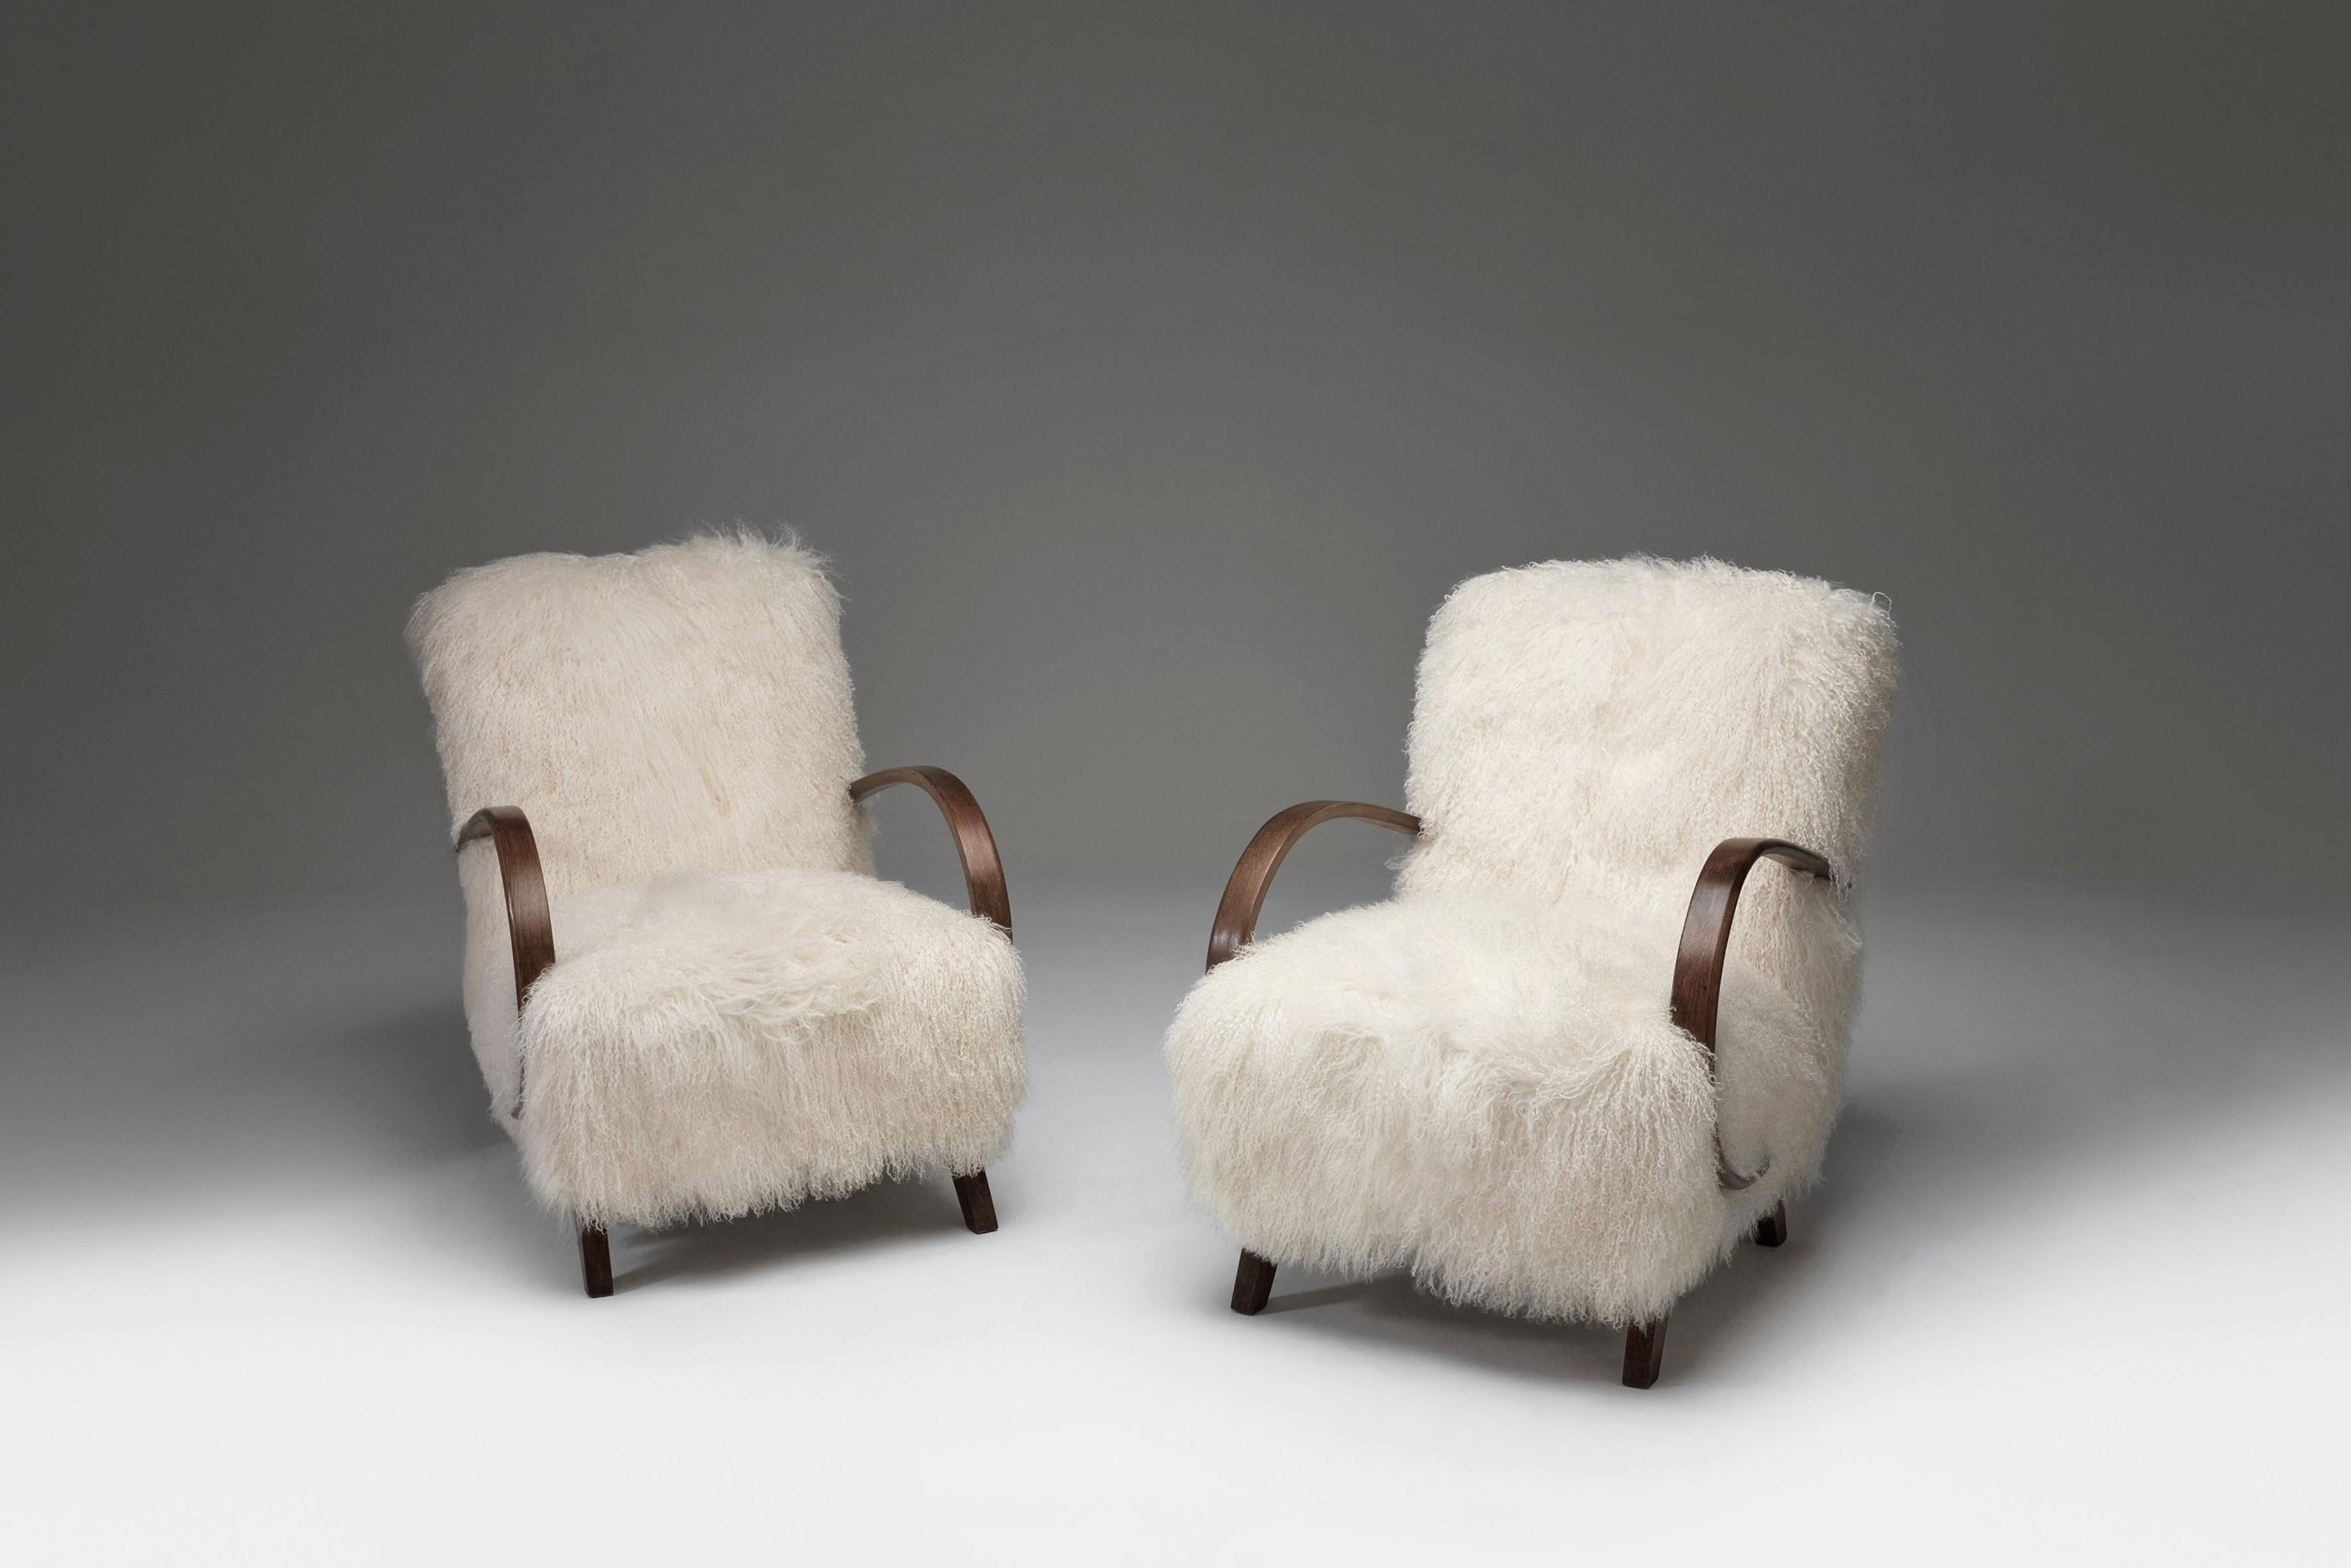 Jindrich Halabala armchairs model “C”, Czech Republic, 1930s.

Amazing armchairs upholstered in white Tibetan lambswool with curly hair.

These chairs have a dynamic and generous appearance, together with beautiful, fuzzy and coziness upholstery